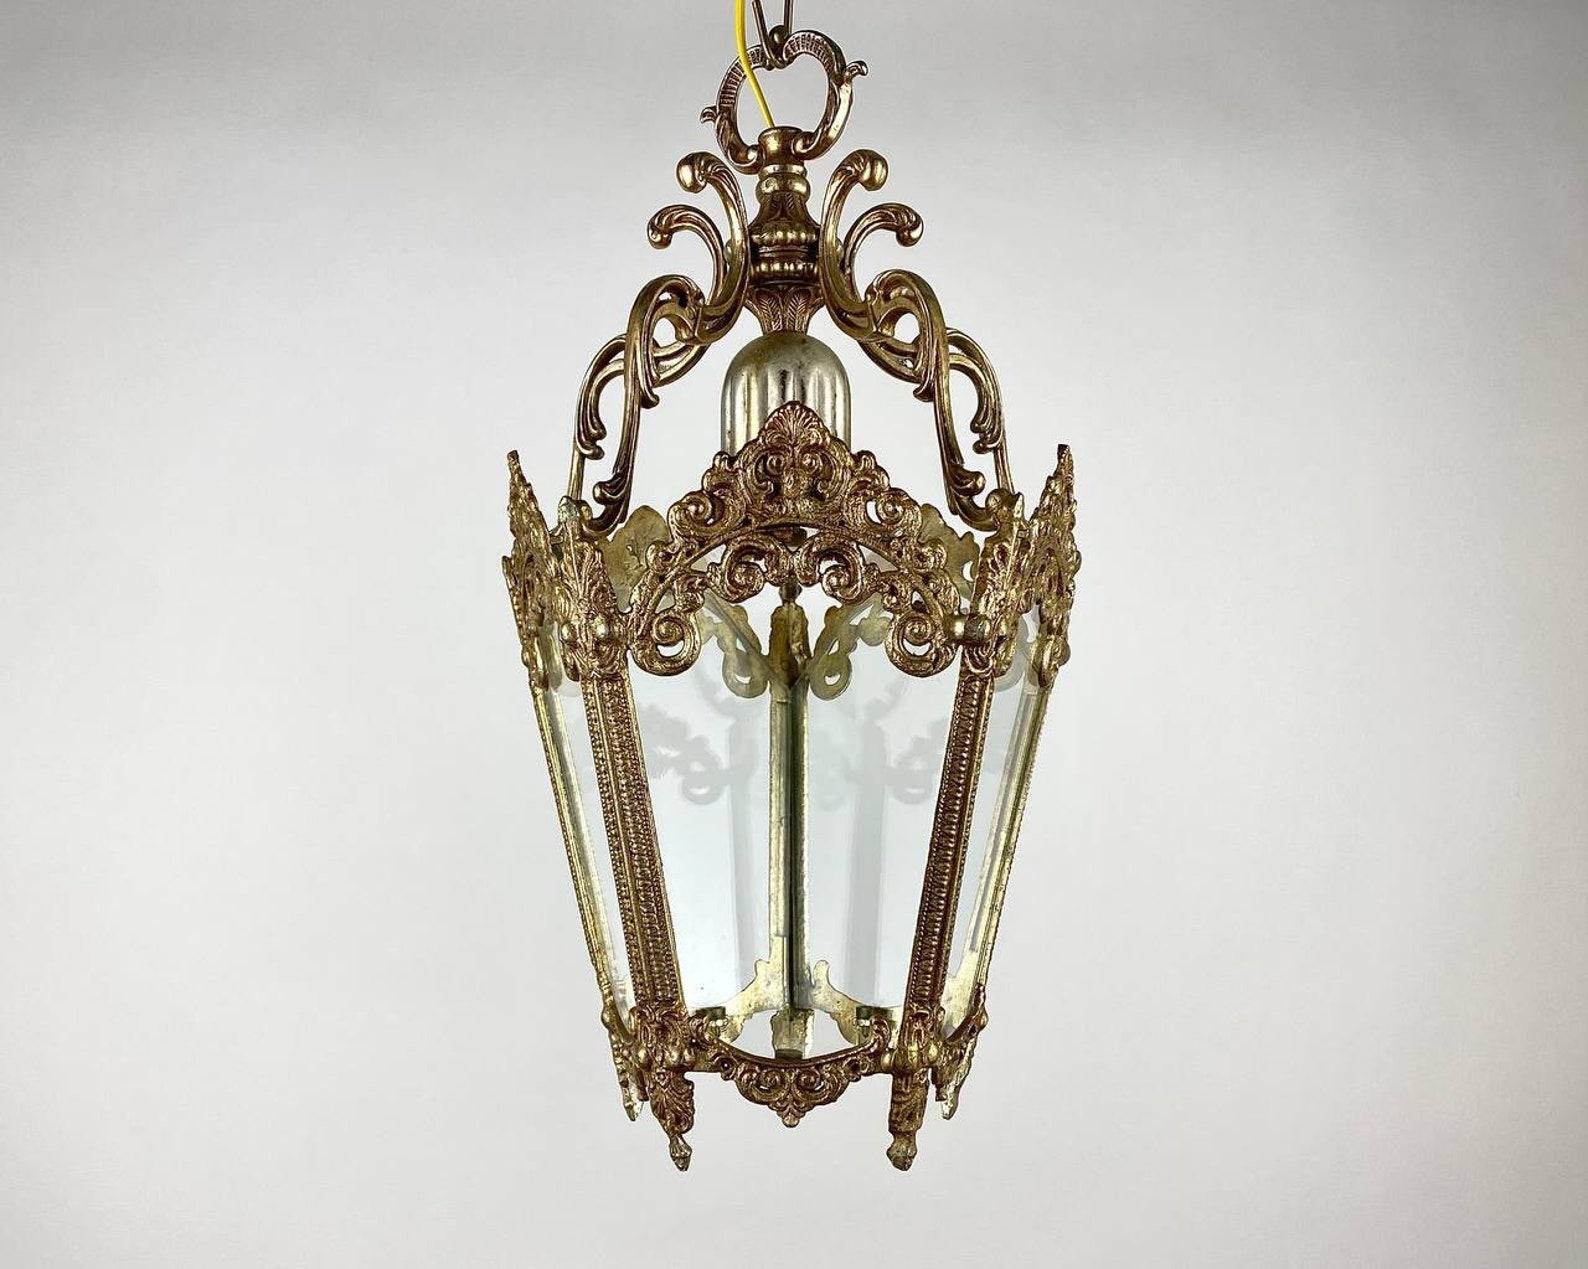 Vintage 5 sided Iron and Glass Ceiling Lantern. 

Very beautiful decorative iron lantern chandelier with five glass panels and forged metal acanthus leaves. The gold paint on the acanthus leaves and all the decorative details looks delightful.